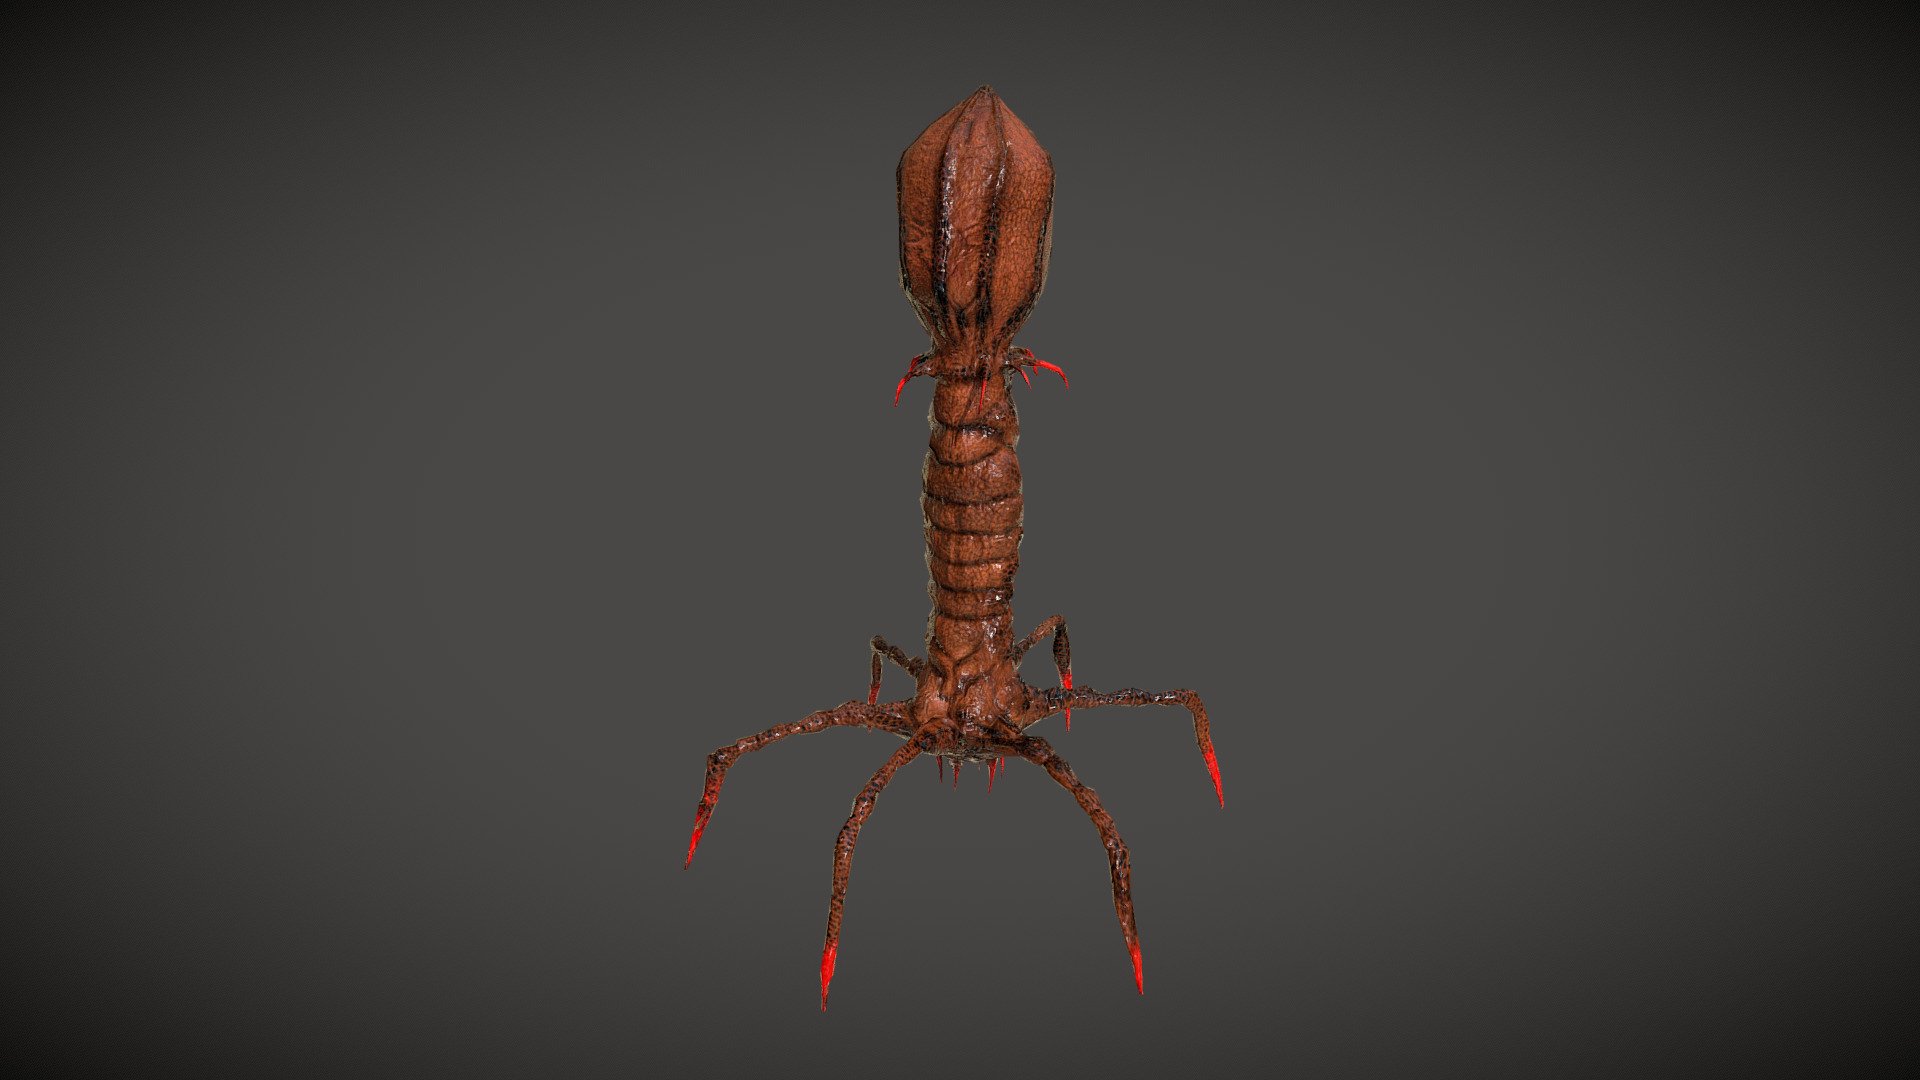 NEW UPDATE (11.08.2021) -Added 4k textures,blender file,unreal ready fbx

Contains 4k PBR Textures (1):

Blender File Unreal Ready FBX

https://www.artstation.com/artwork/g2rVPP


A bacteriophage also known informally as a phage is a virus that infects and replicates within bacteria and archaea. The term was derived from &ldquo;bacteria